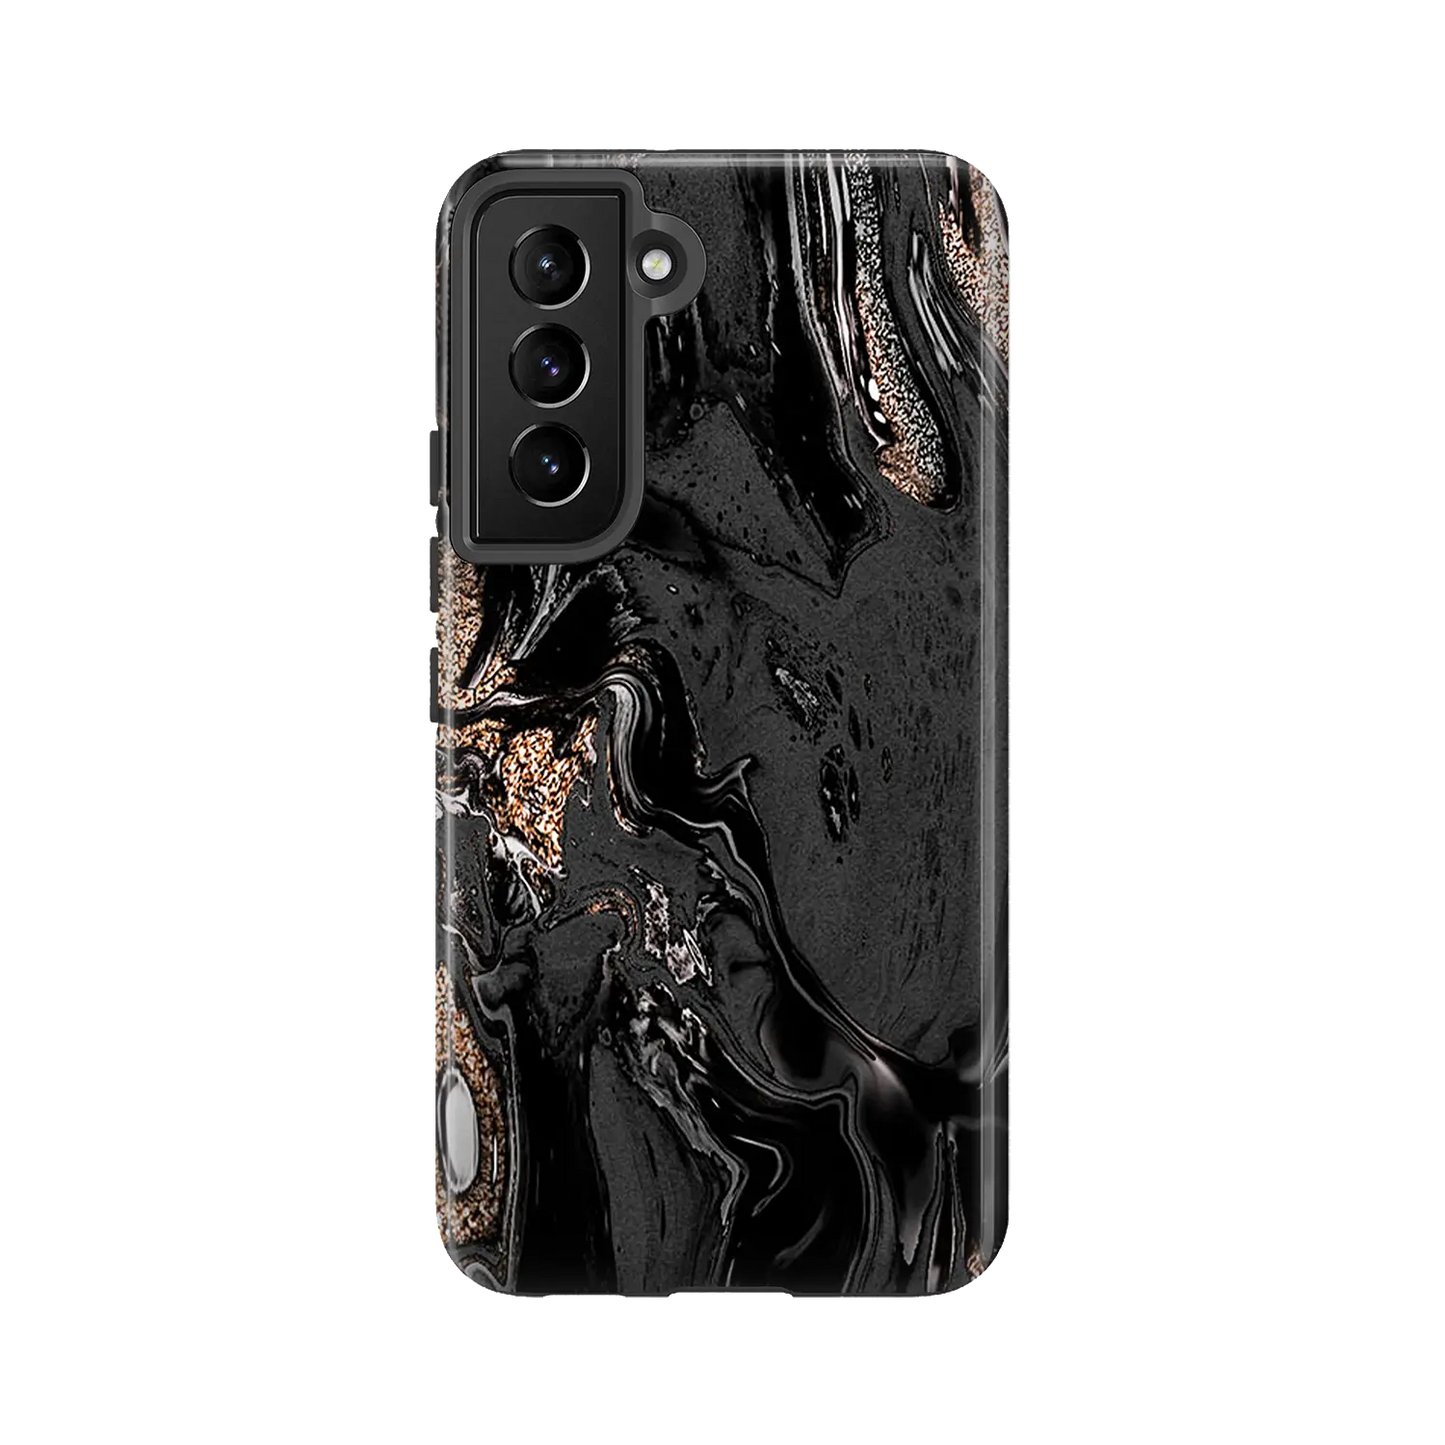 Marble Drip - Personalised Galaxy S Case